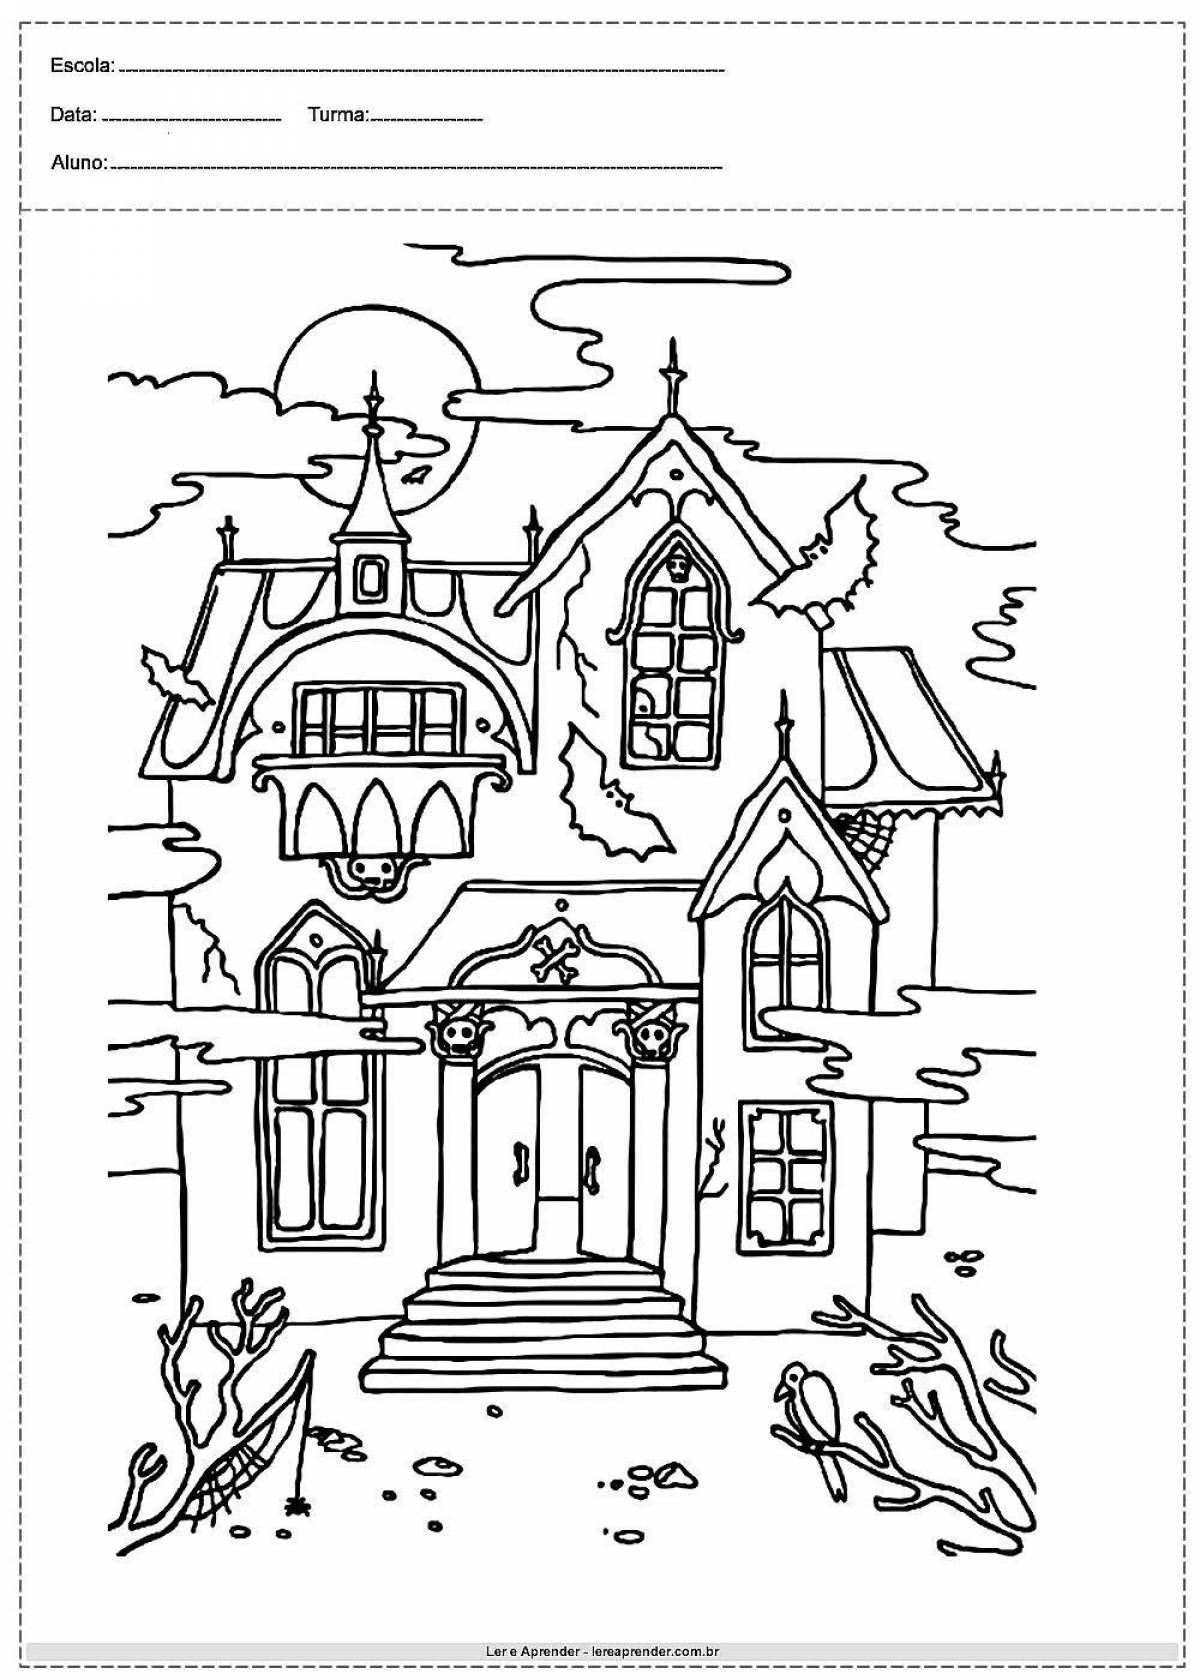 Coloring book magic burning house for kids